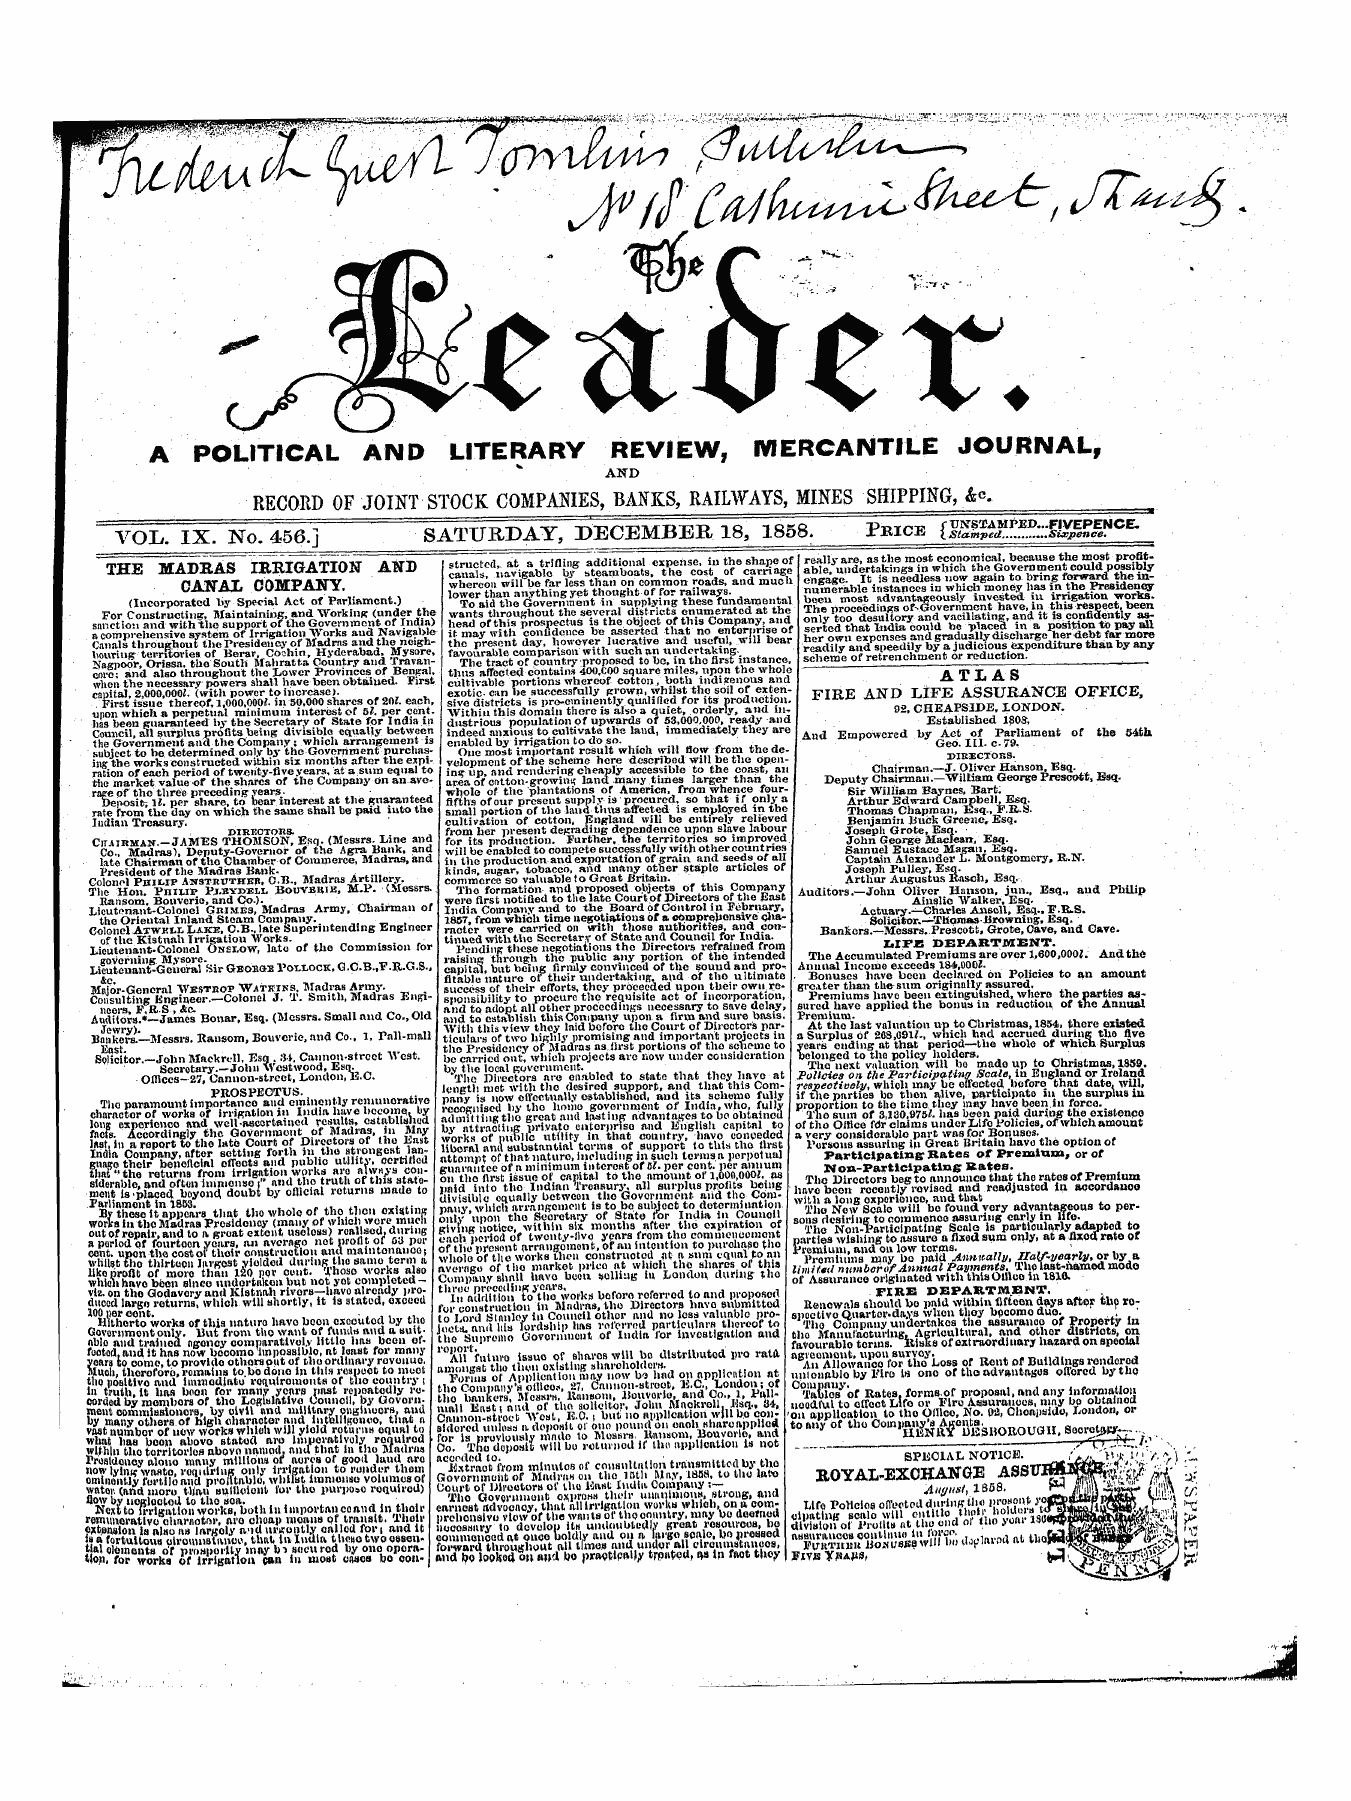 Leader (1850-1860): jS F Y, 1st edition - The Madras Irrigation And Canal Company.